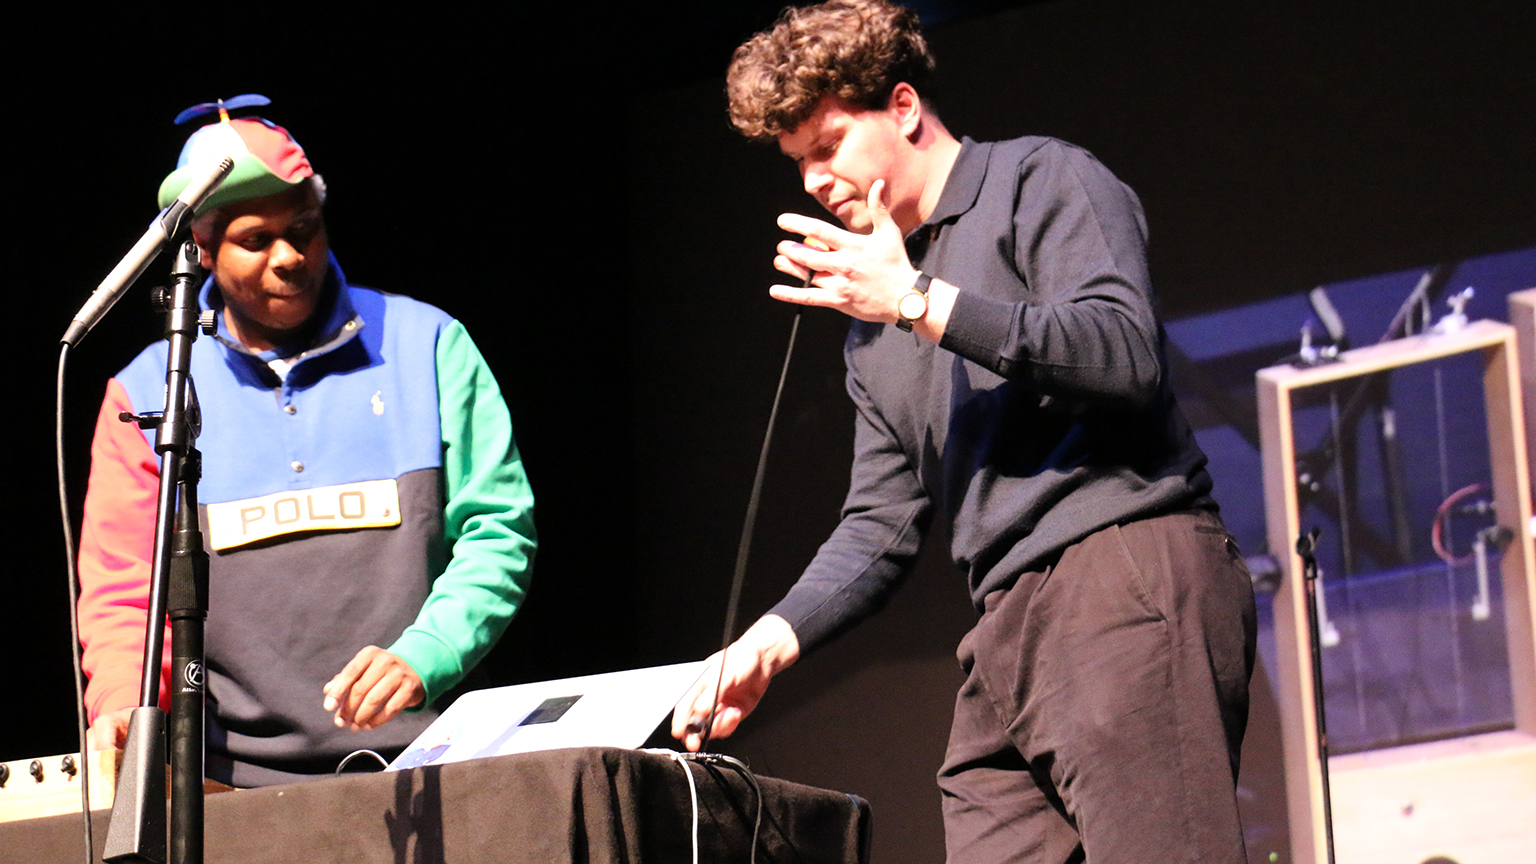 Stretchi creator Hugh Aynsley demonstrates his instrument on stage with collaborator Shannon Ladson.